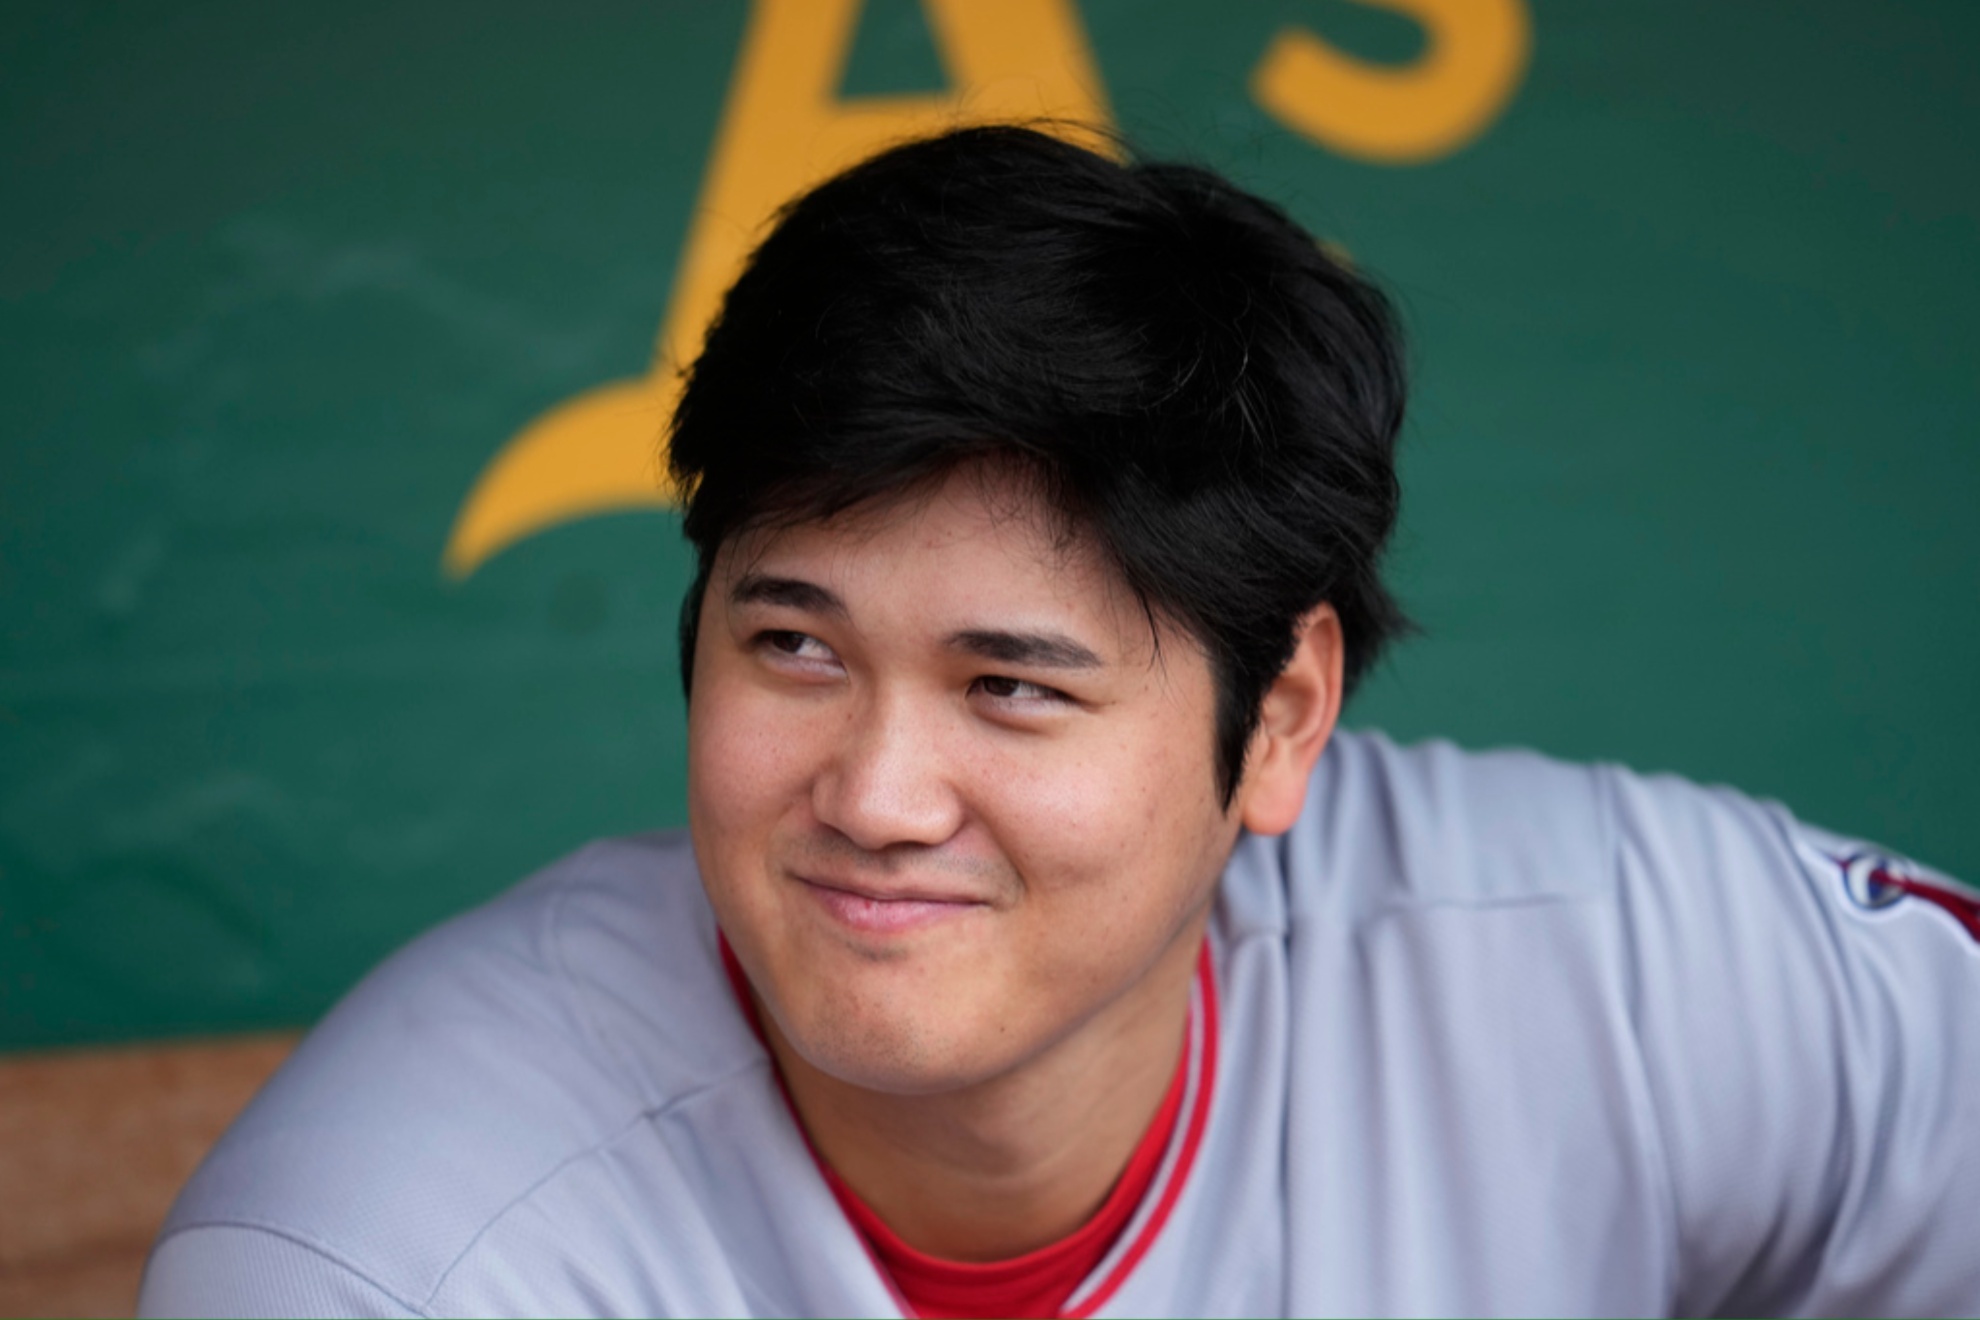 The Angels were forced to use a stand-in for Ohtani for a team photo